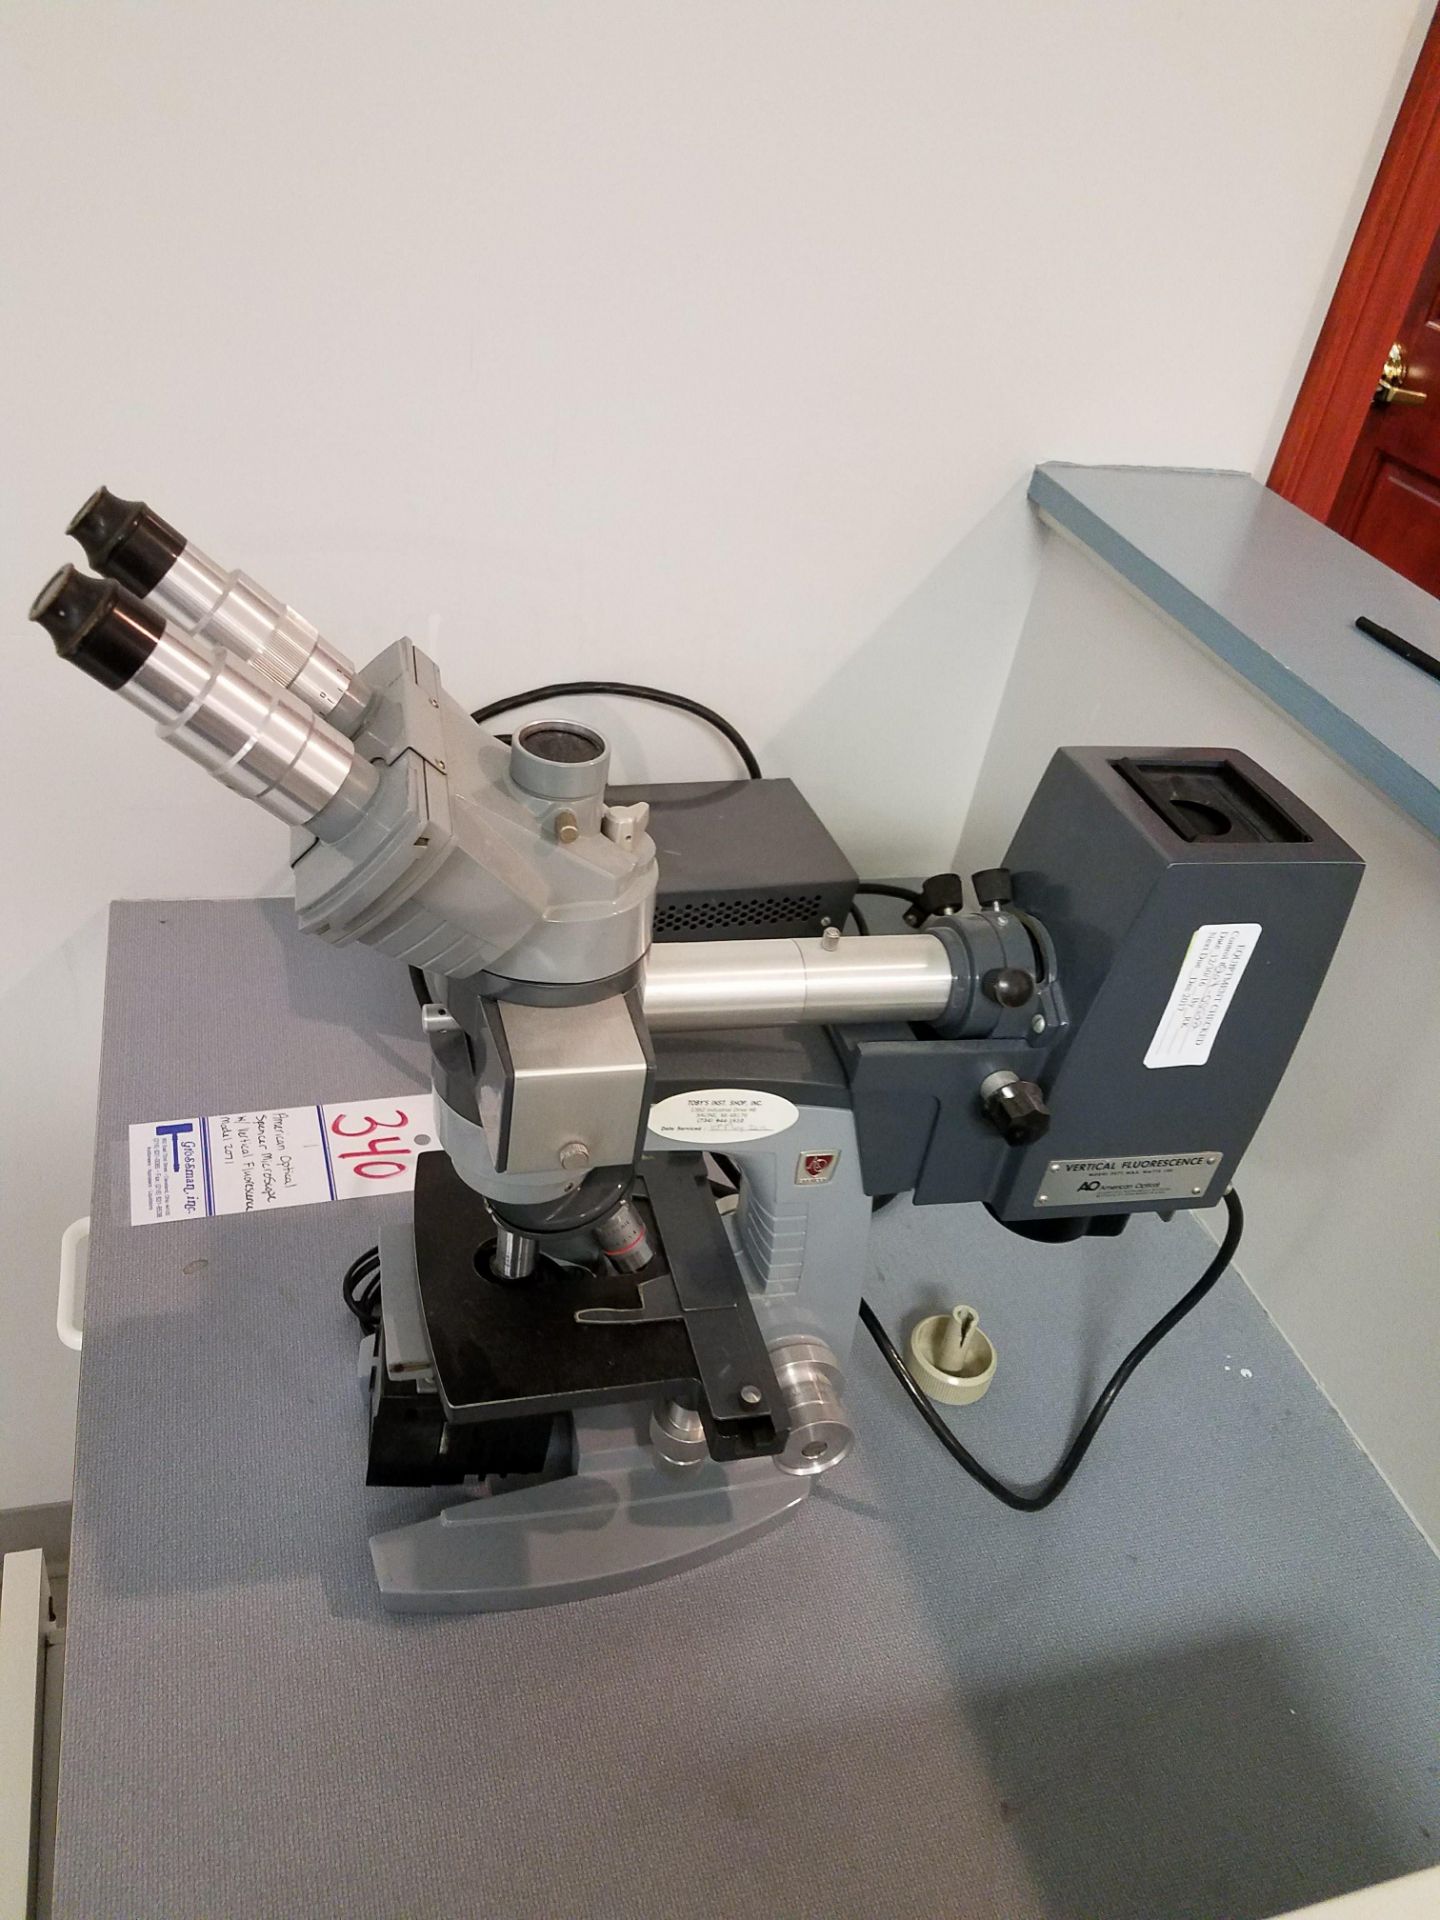 1 AMERICAN OPTICAL SPENCER MICROSCOPE w/ VERTICAL FLUORESCENCE MODEL 2071 - Image 2 of 4